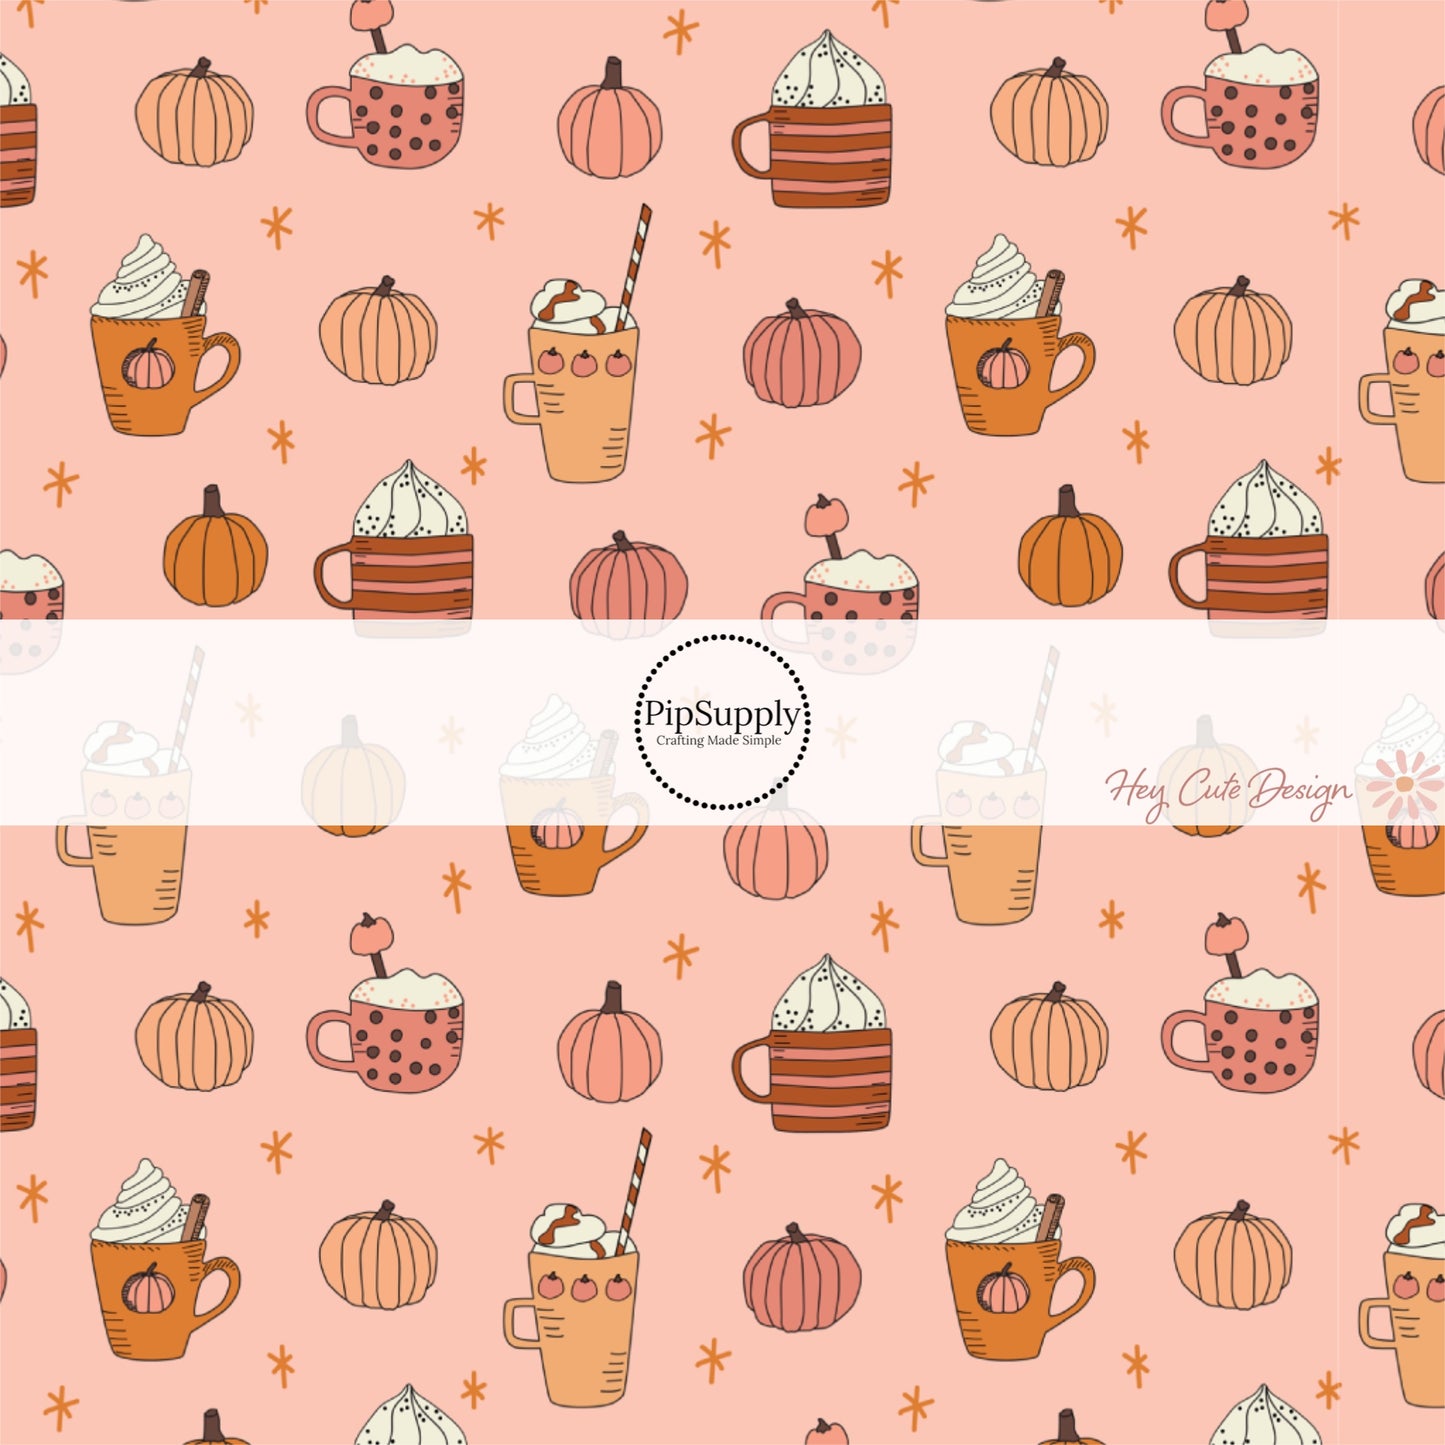 These fall pumpkin themed cream fabric by the yard features pumpkin spice cups surrounded by pumpkins. This fun fall themed fabric can be used for all your sewing and crafting needs! 